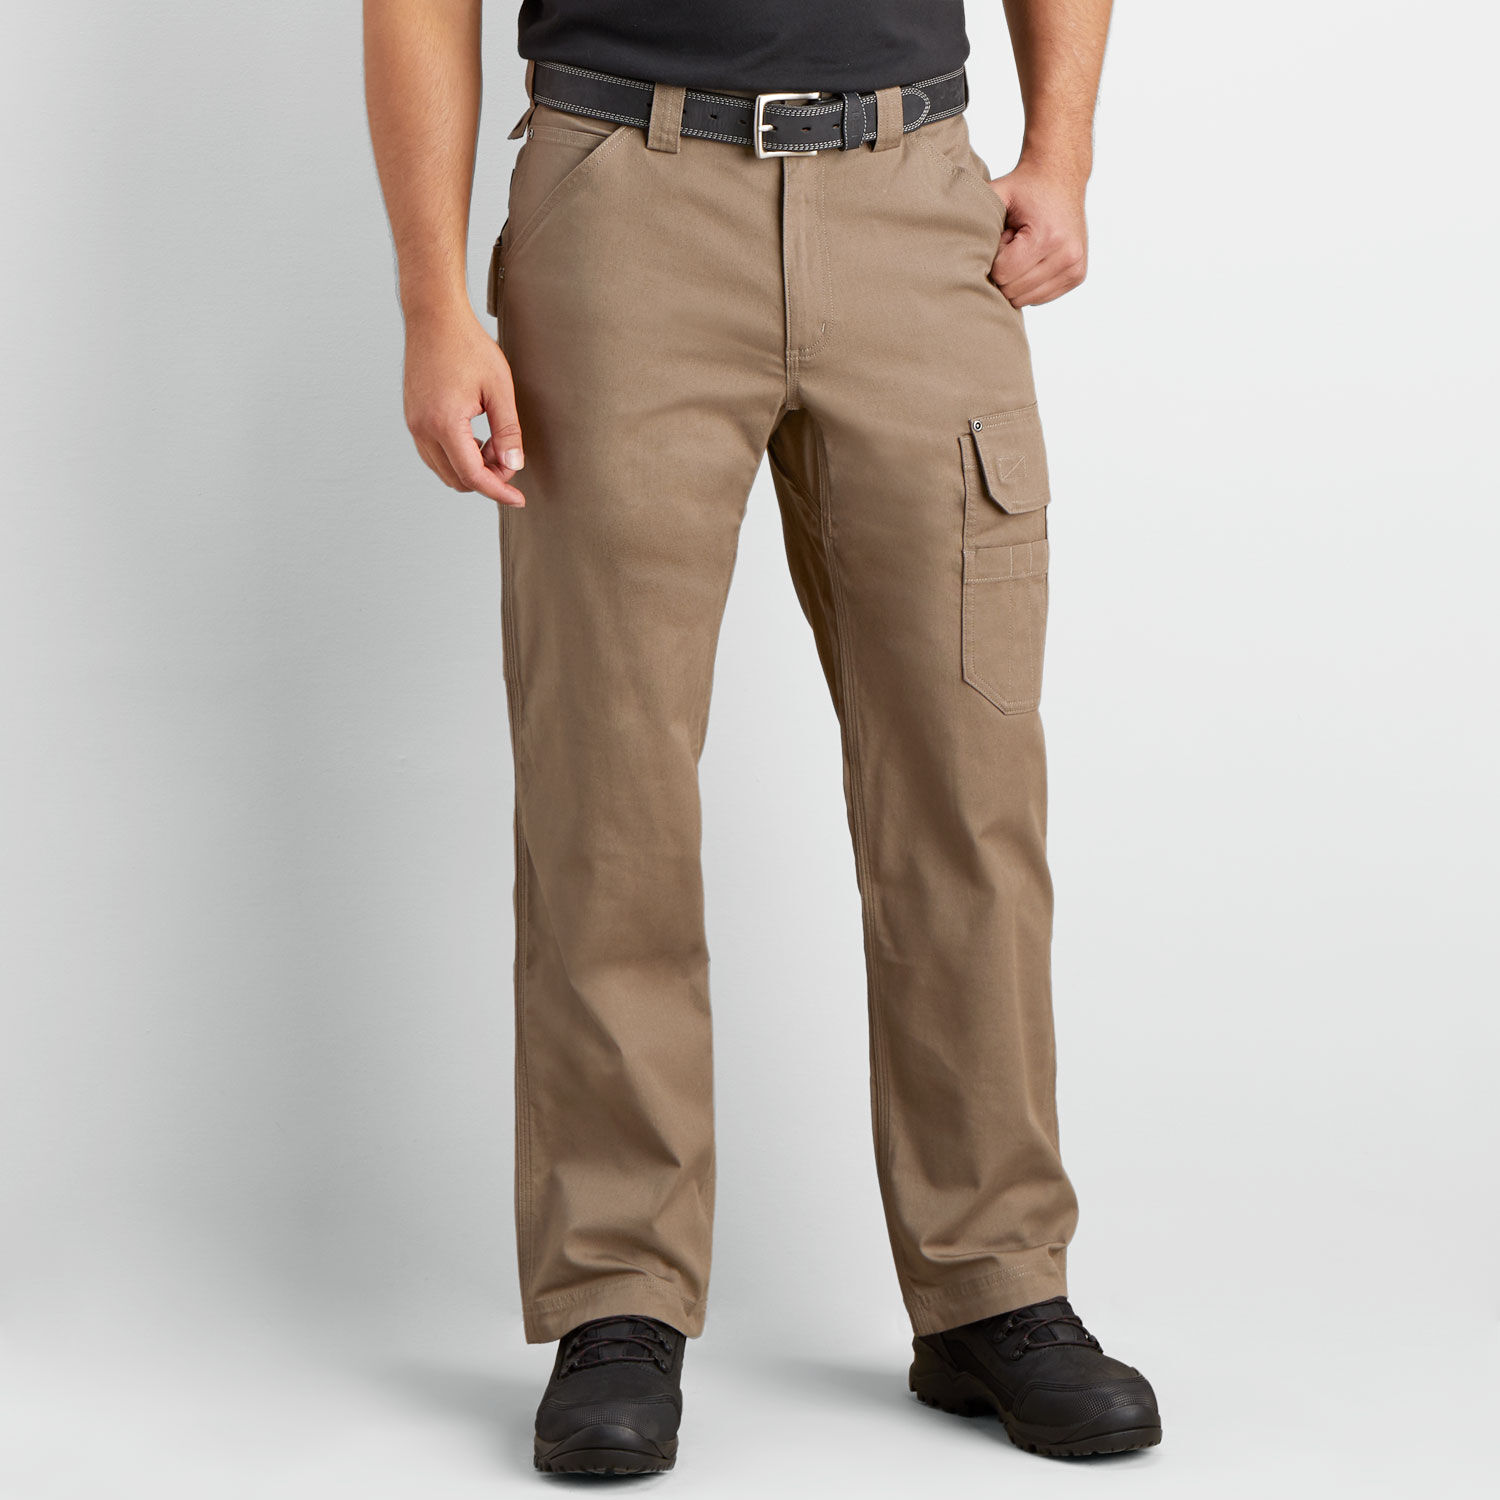 Mens DuluthFlex Fire Hose CoolMax Relaxed Fit Cargo Pants  Duluth Trading  Company